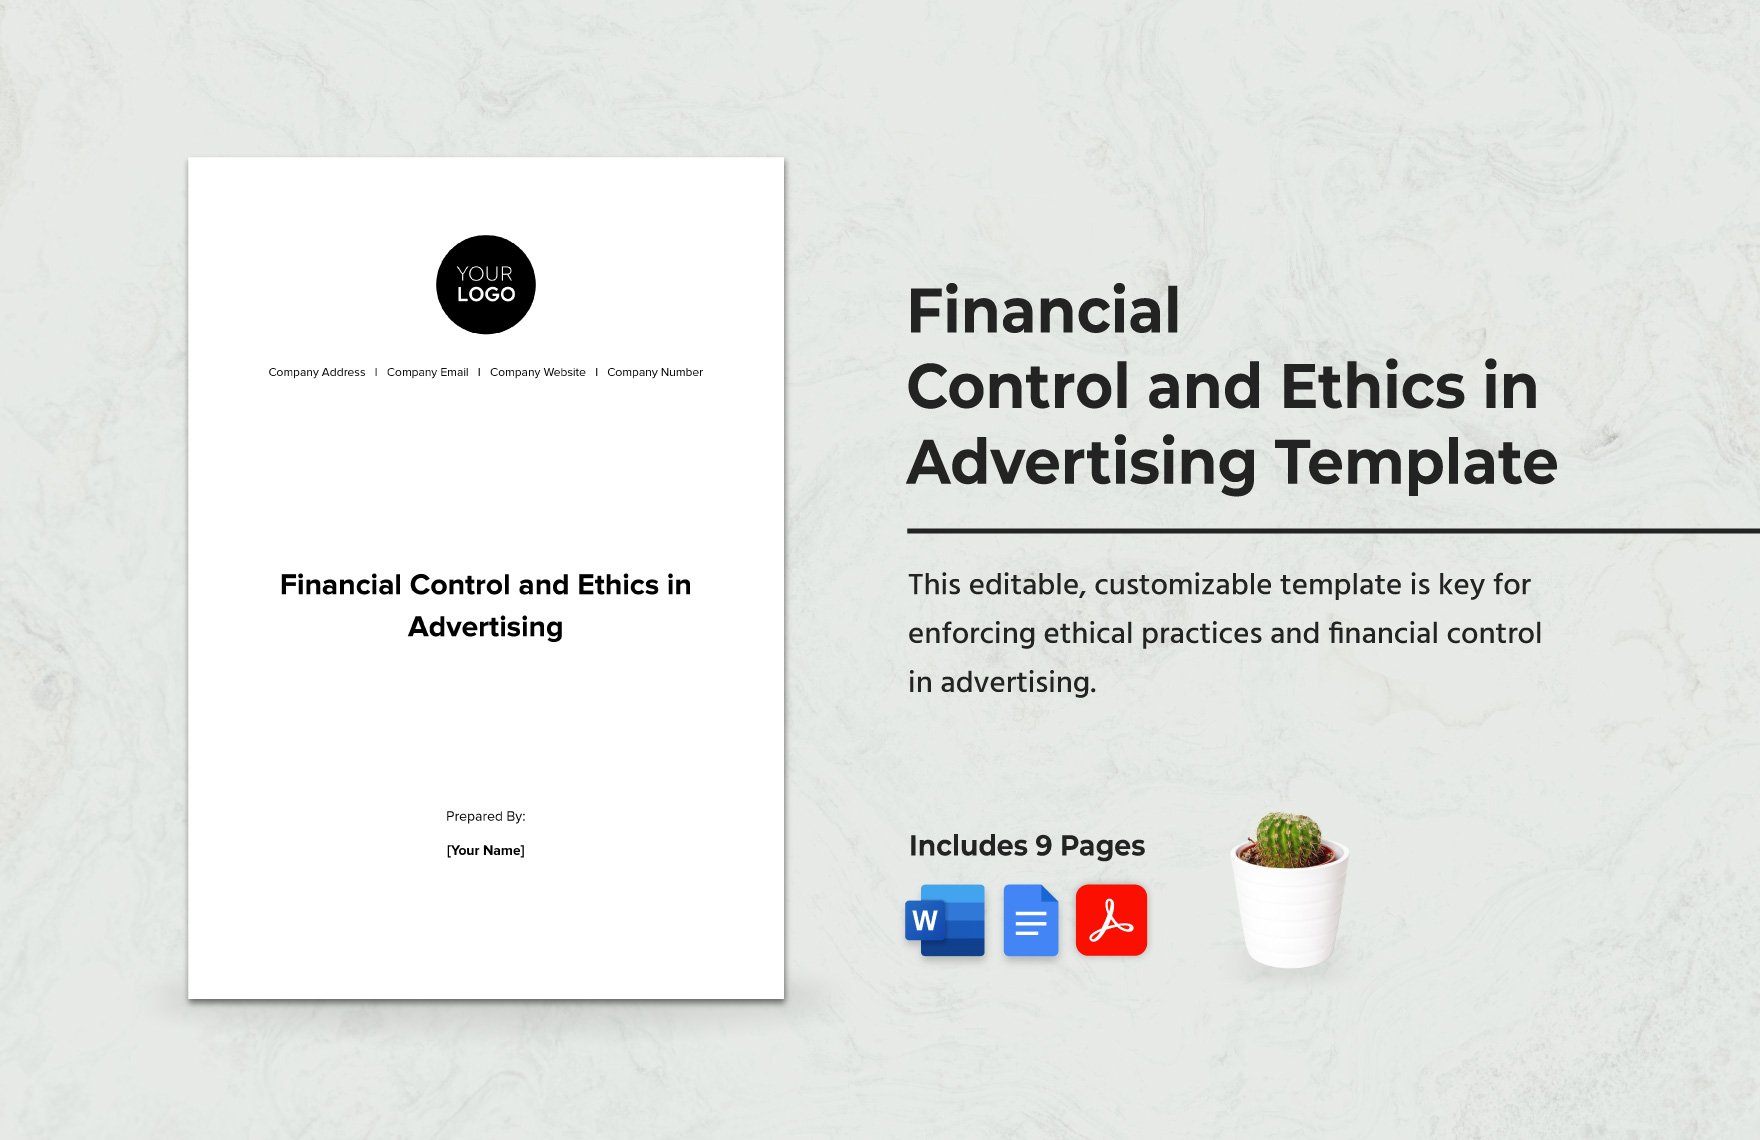 Financial Control and Ethics in Advertising Template